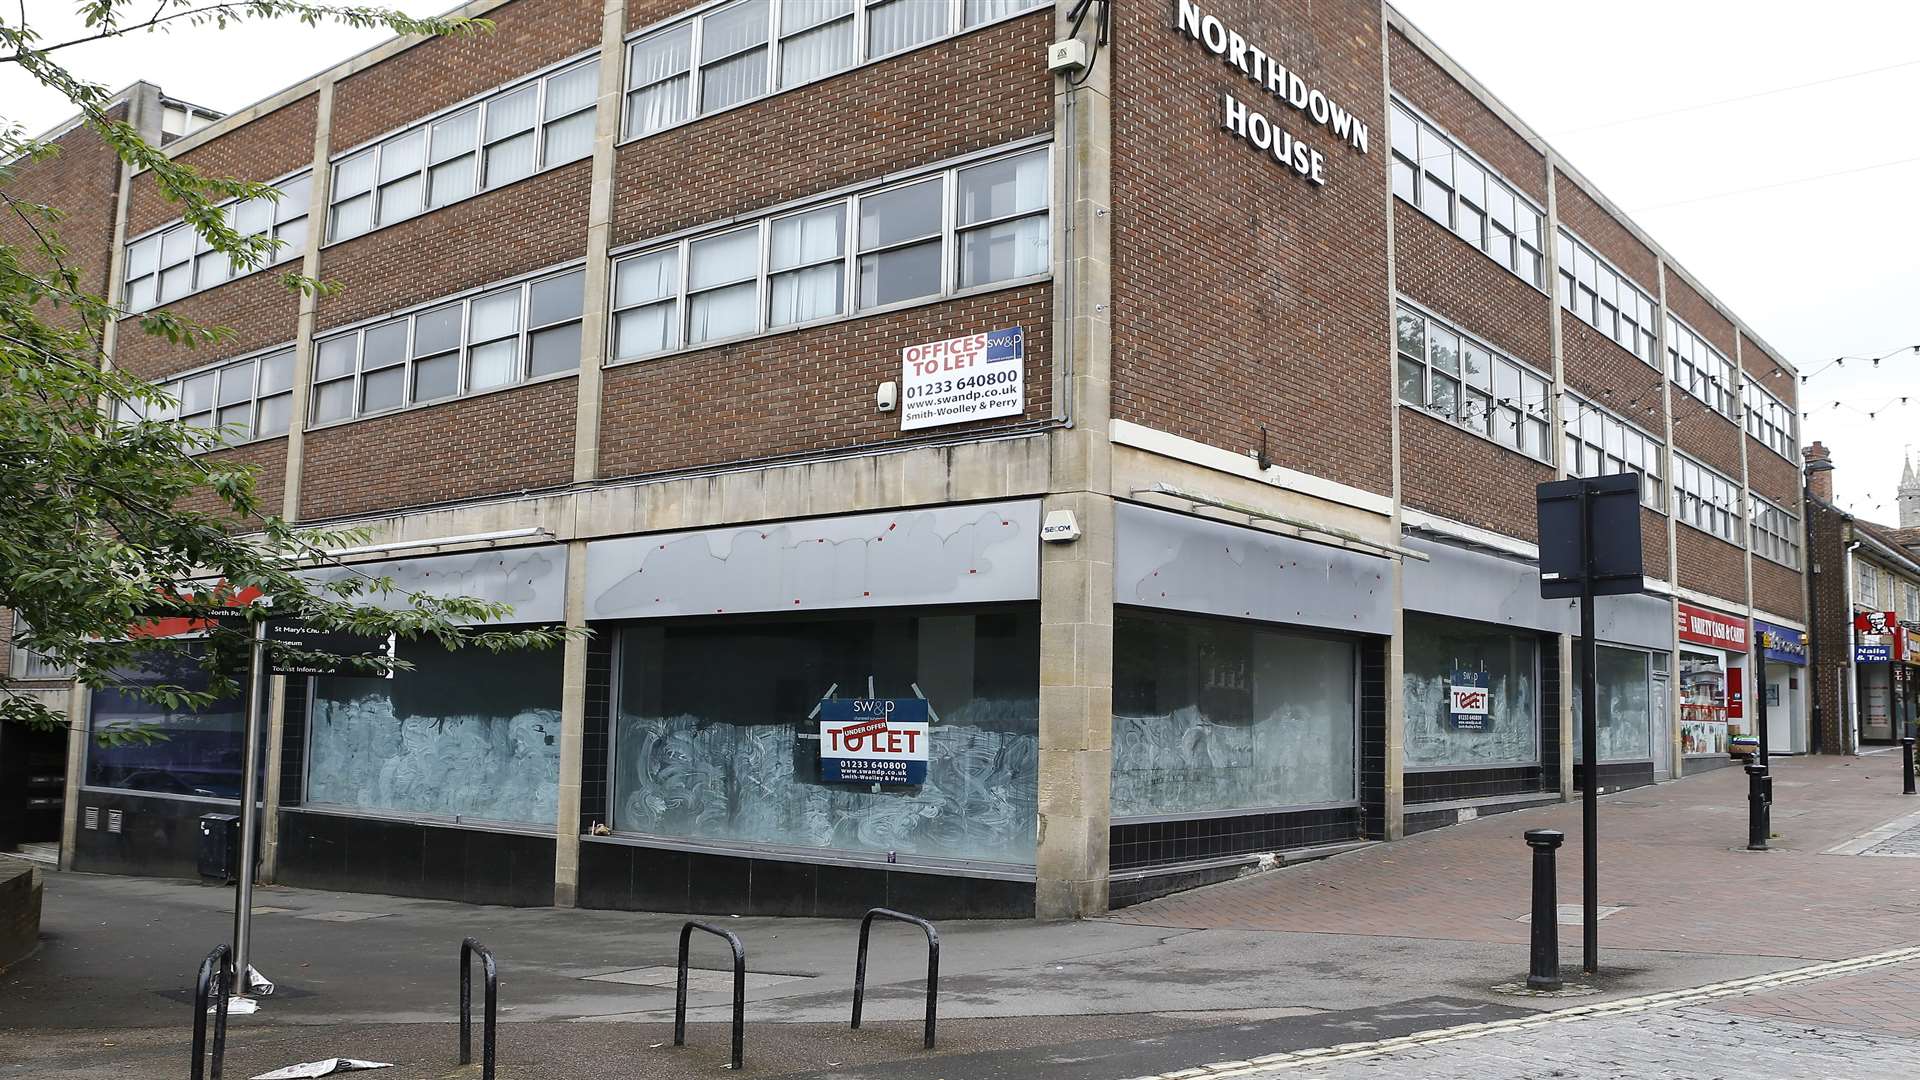 The former Pizza Hut restaurant in the Lower High Street has been empty since 2013